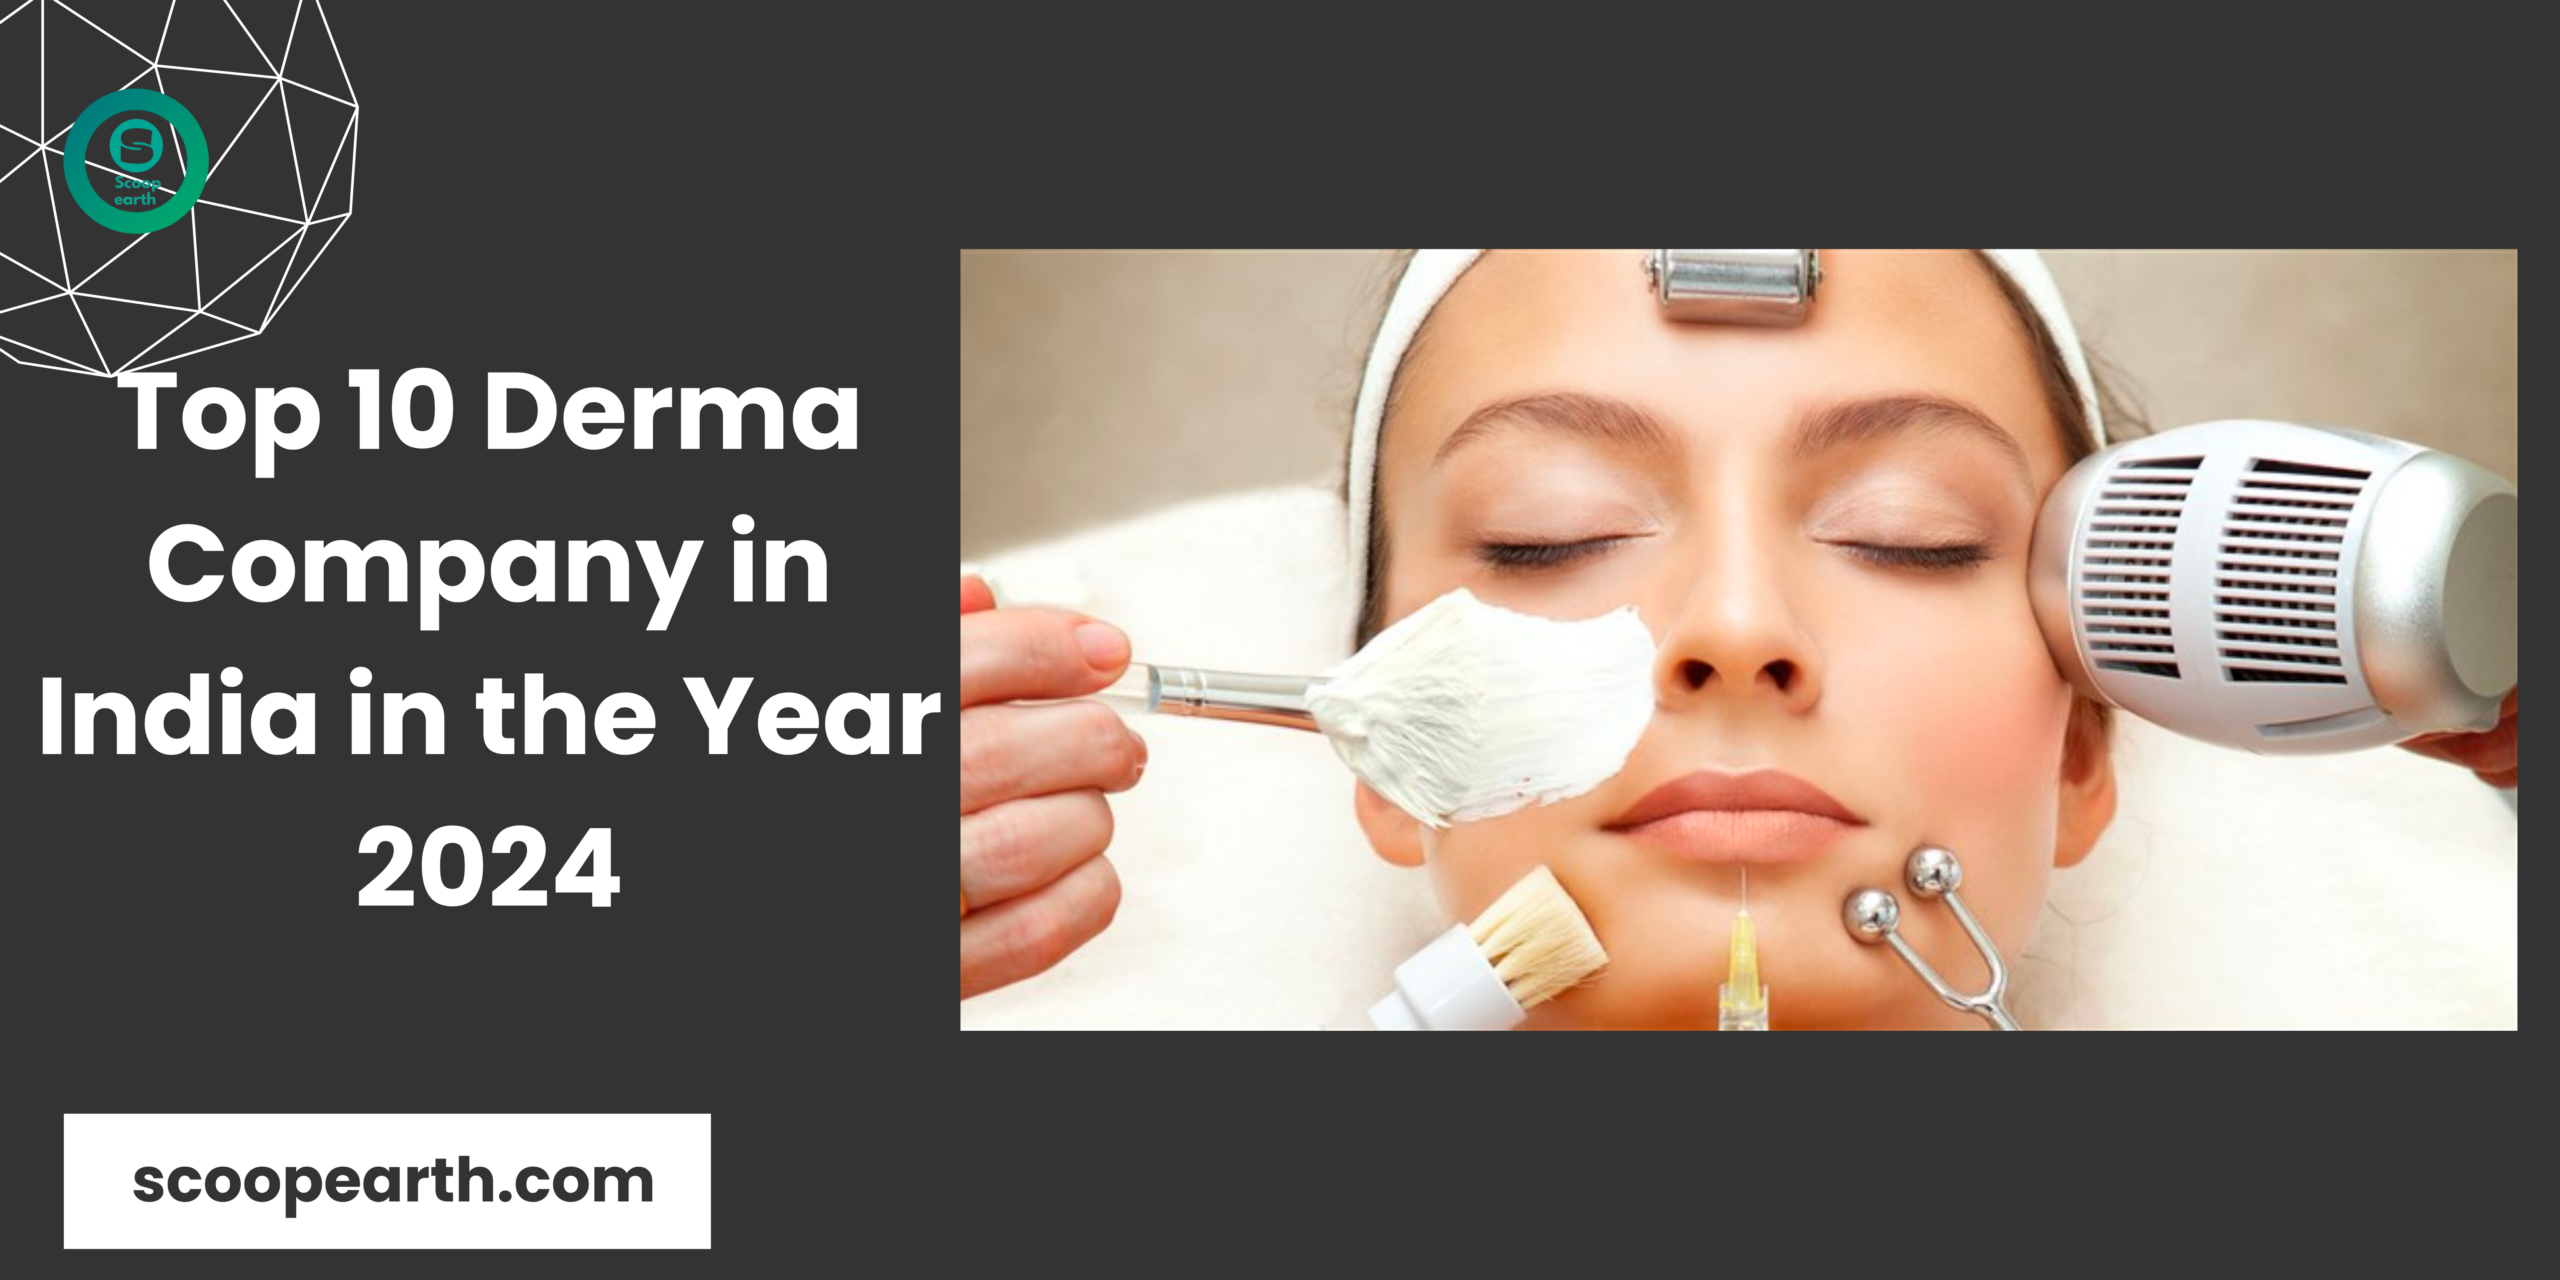 Top 10 Derma Company in India in the Year 2024